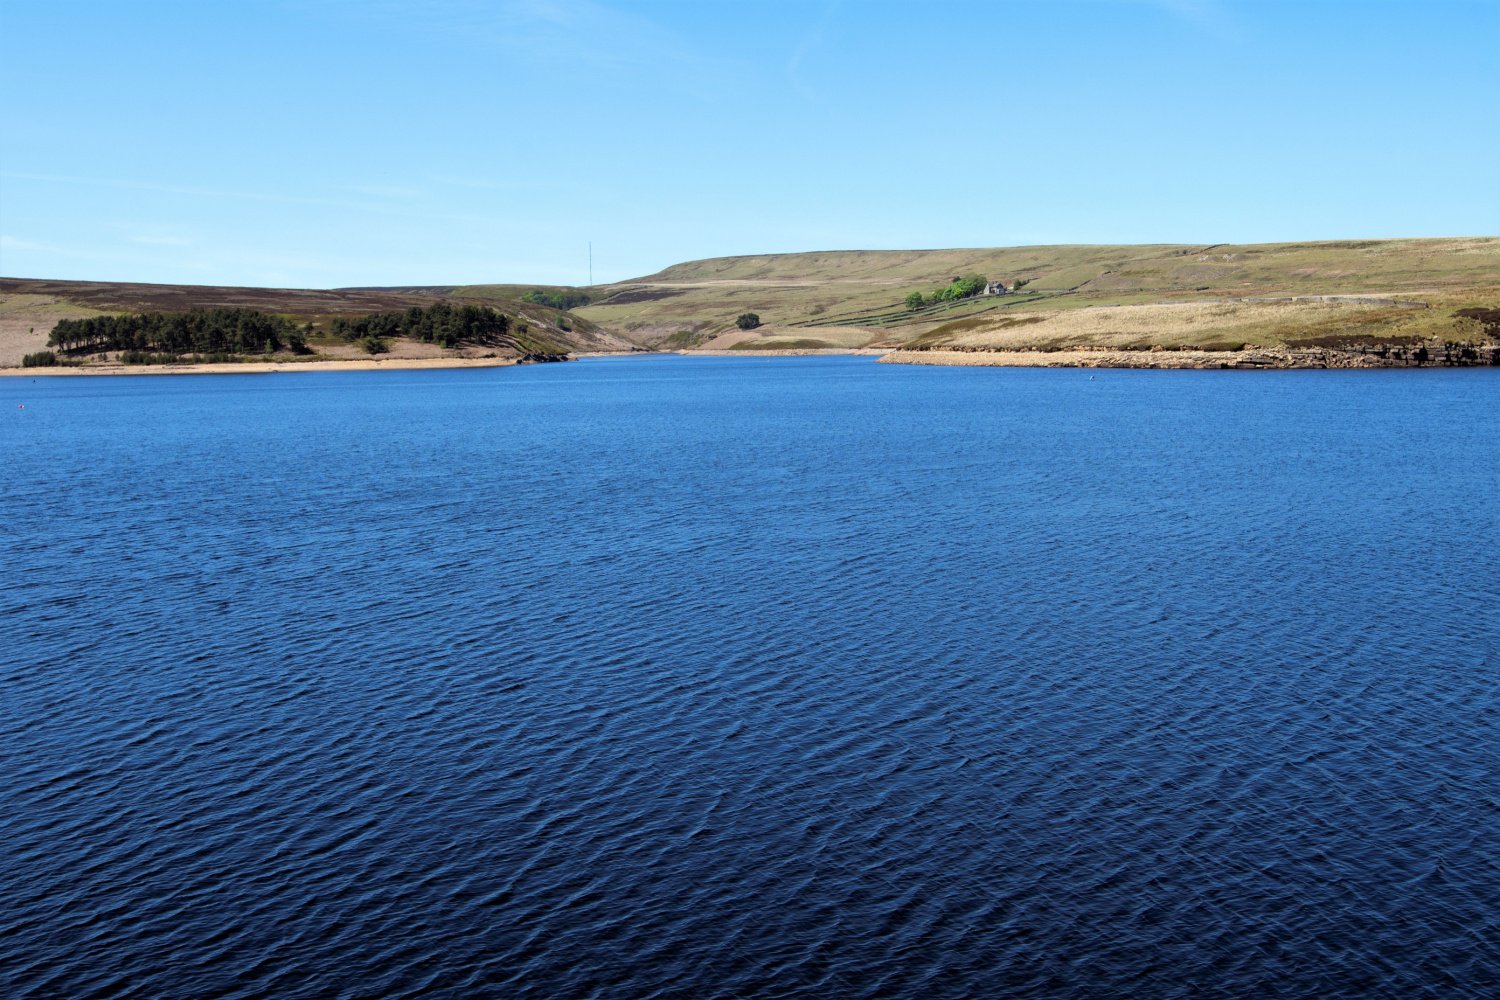 Image name winscar reservoir sheffield south yorkshire the 20 image from the post Walk: Winscar Reservoir in Yorkshire.com.